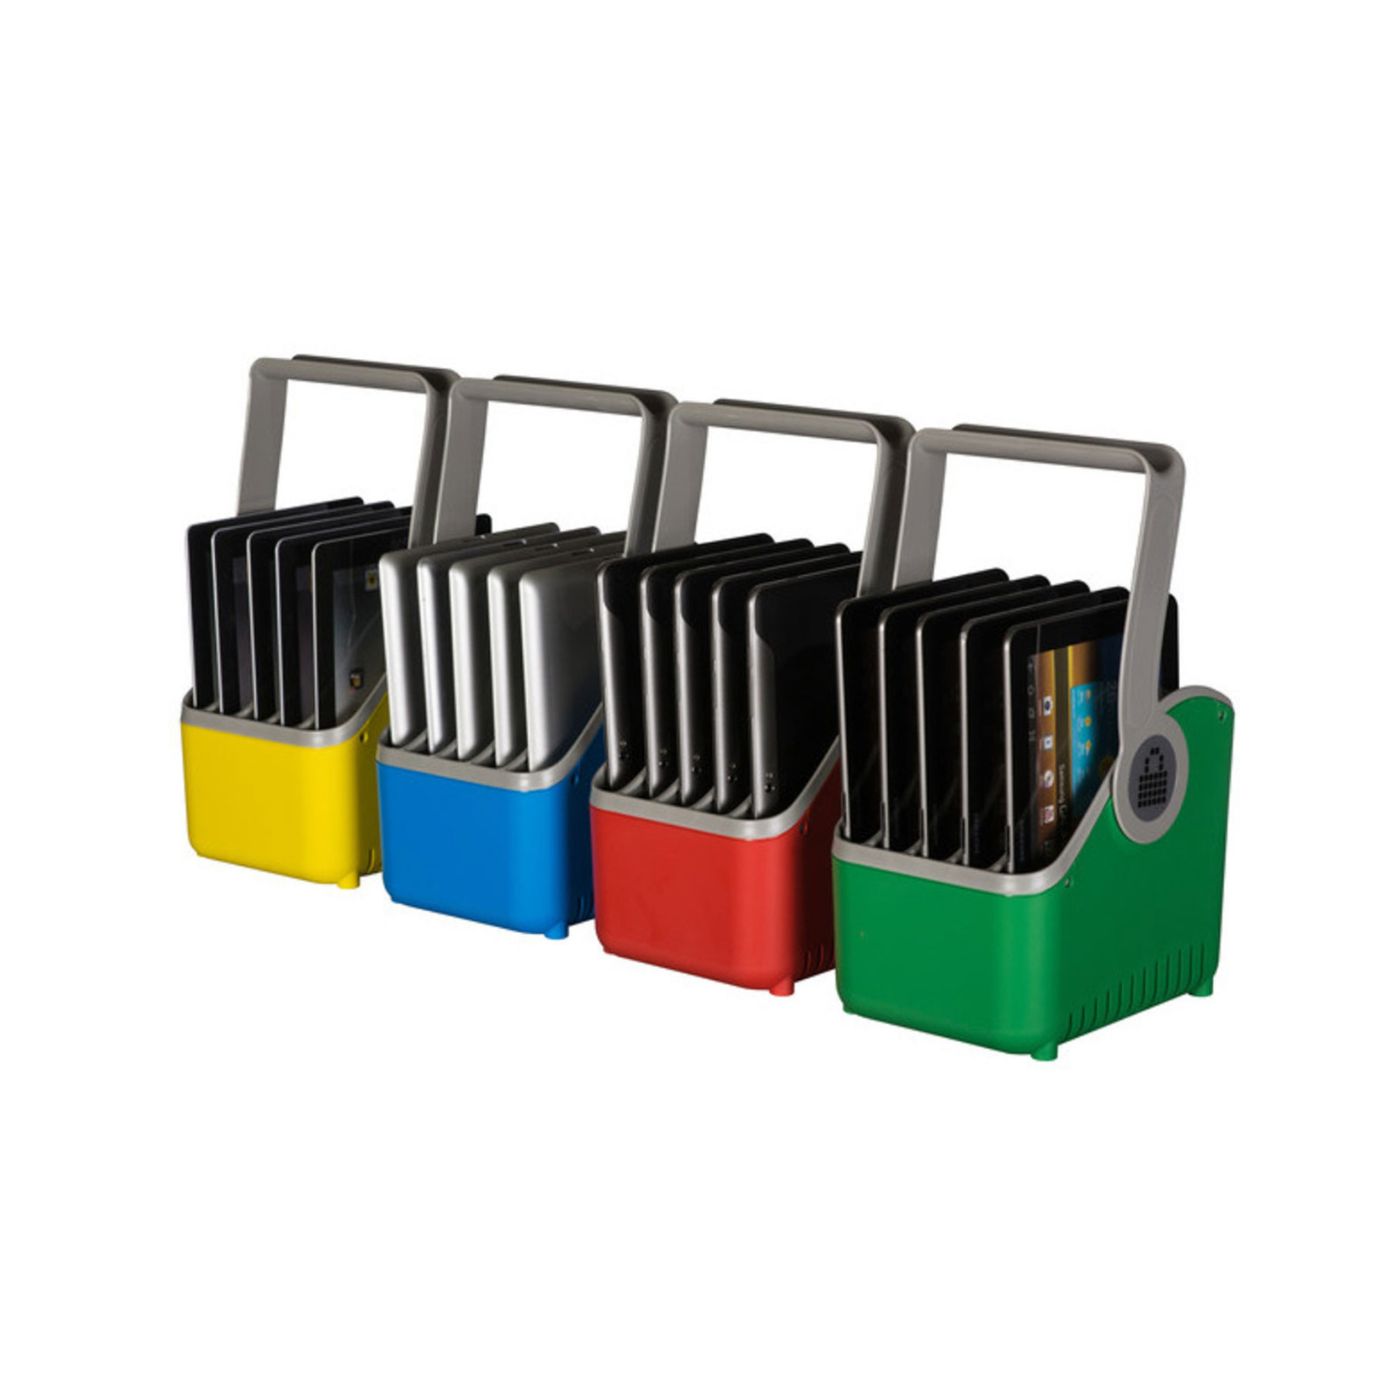 PC Locs 5-Device Carrying Baskets Small Assorted